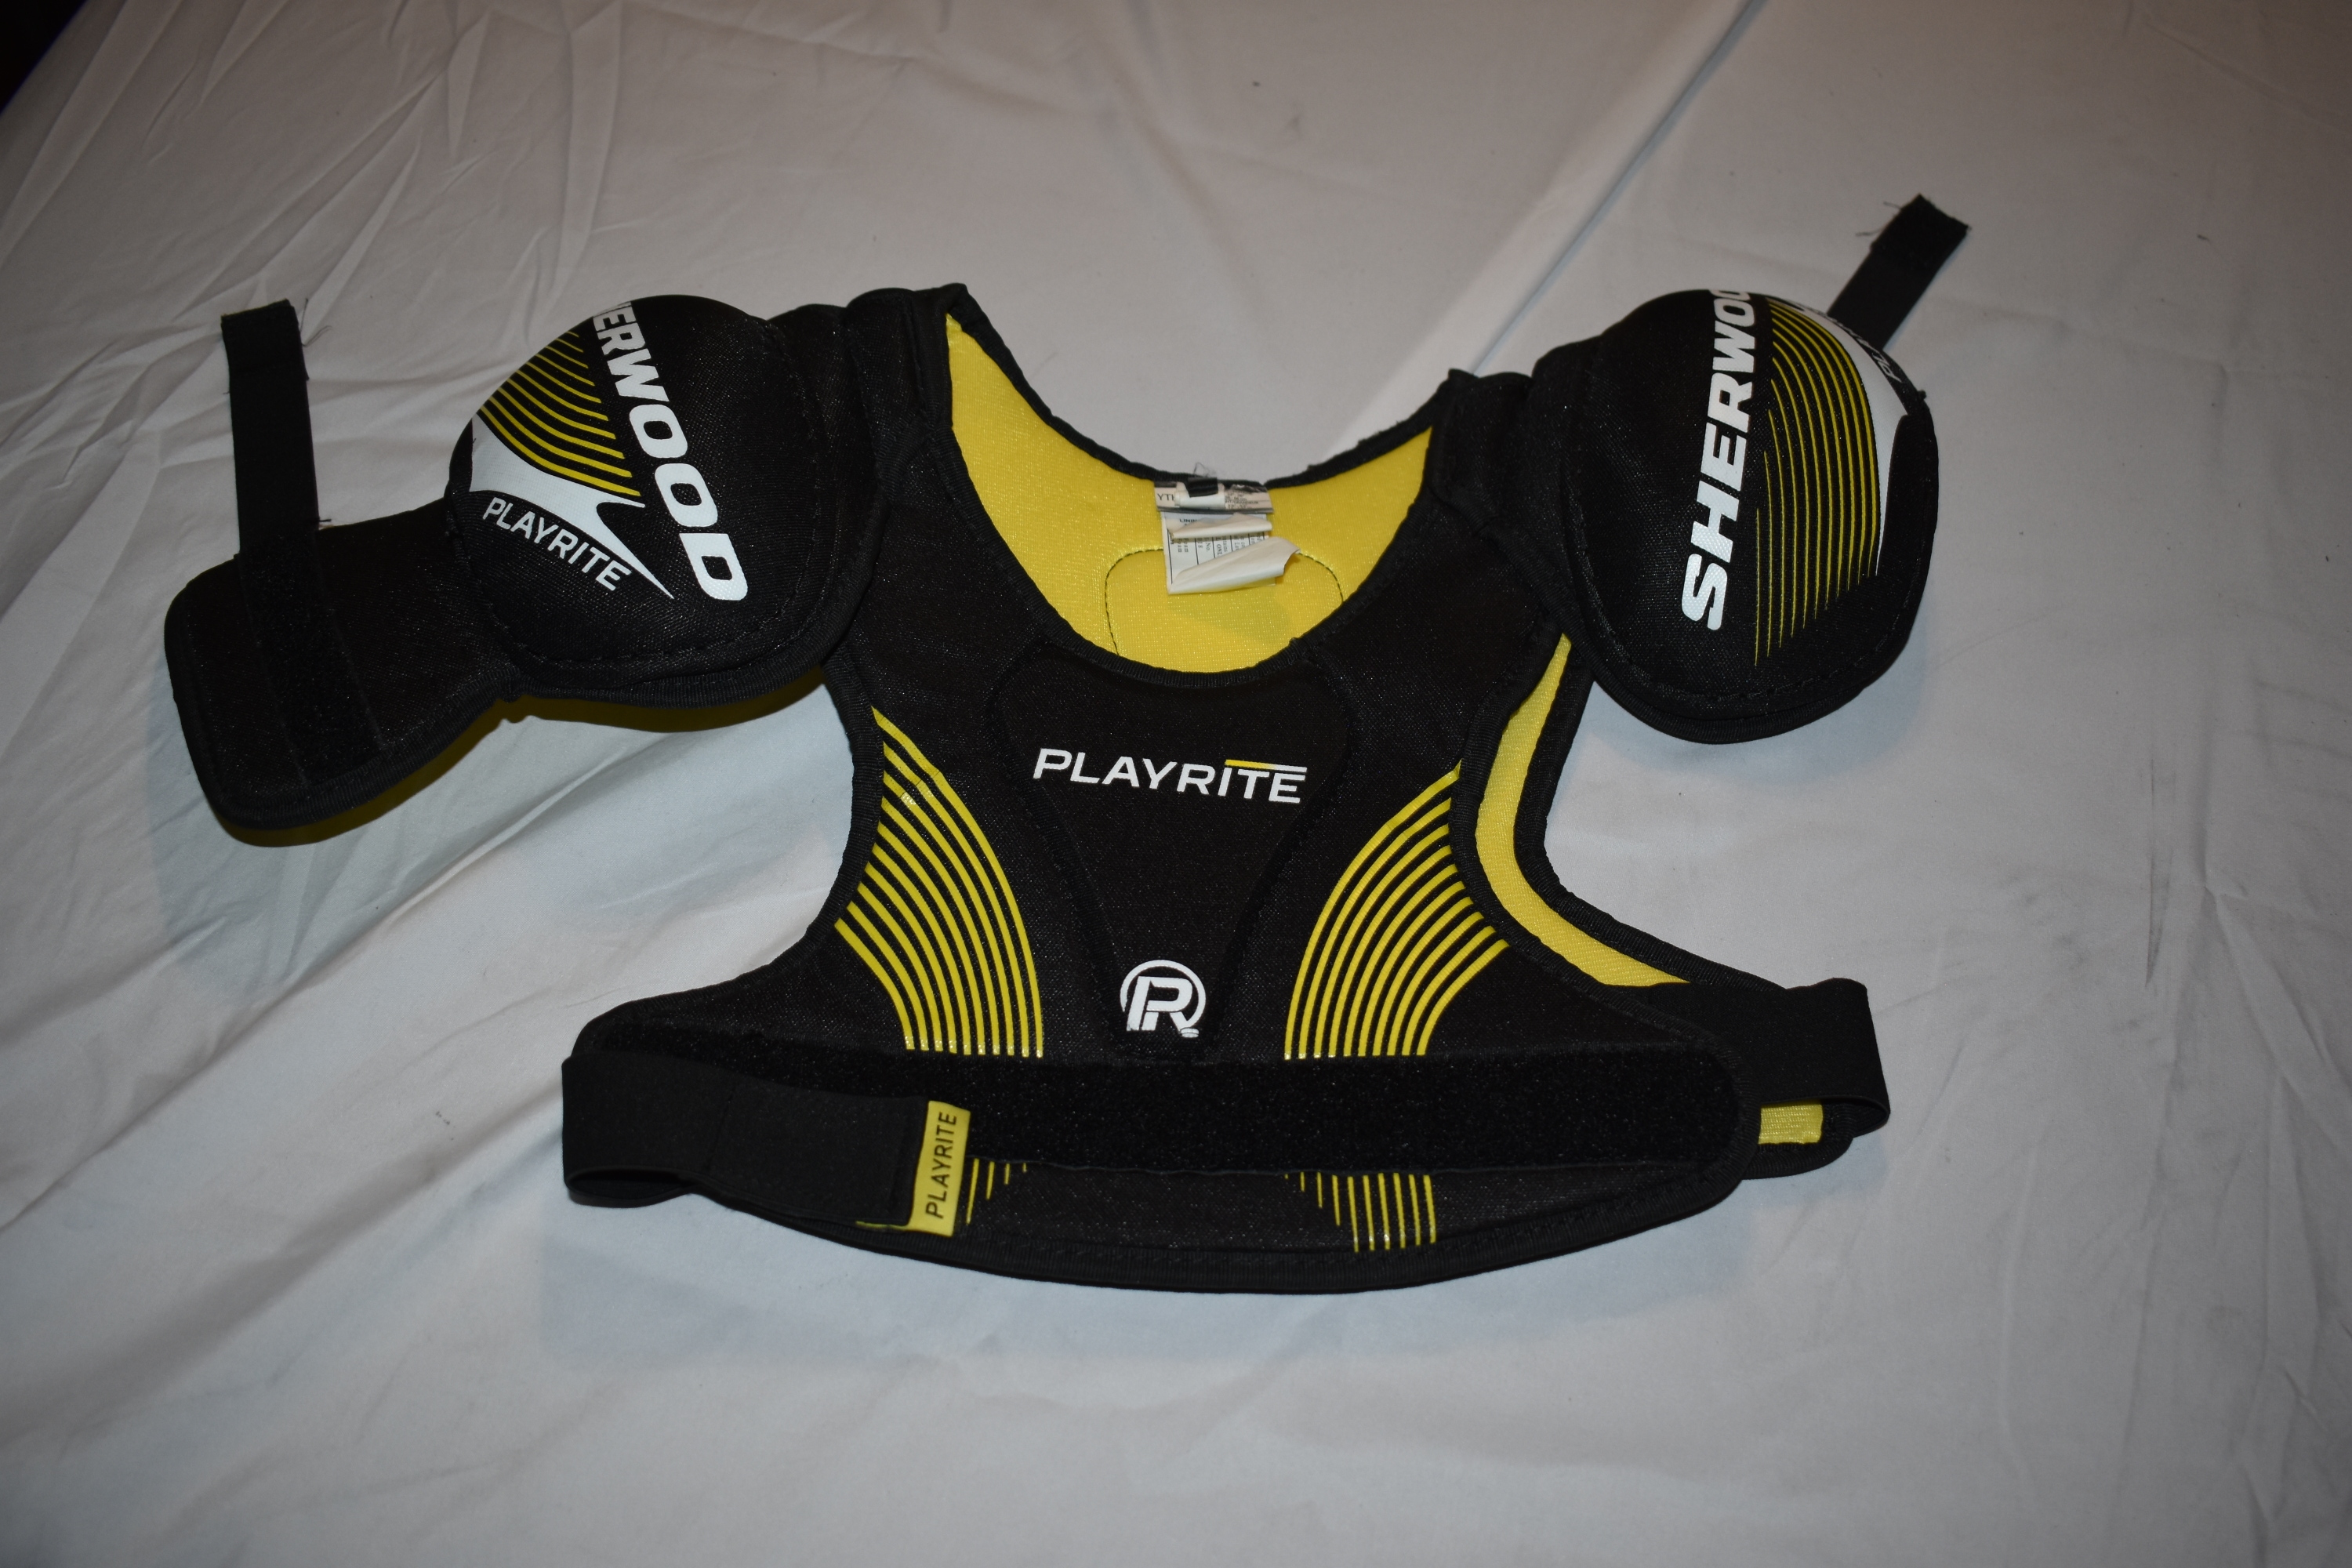 Sher-Wood PlayRite Hockey Shoulder Pads, Black/Yellow, Youth L/XL